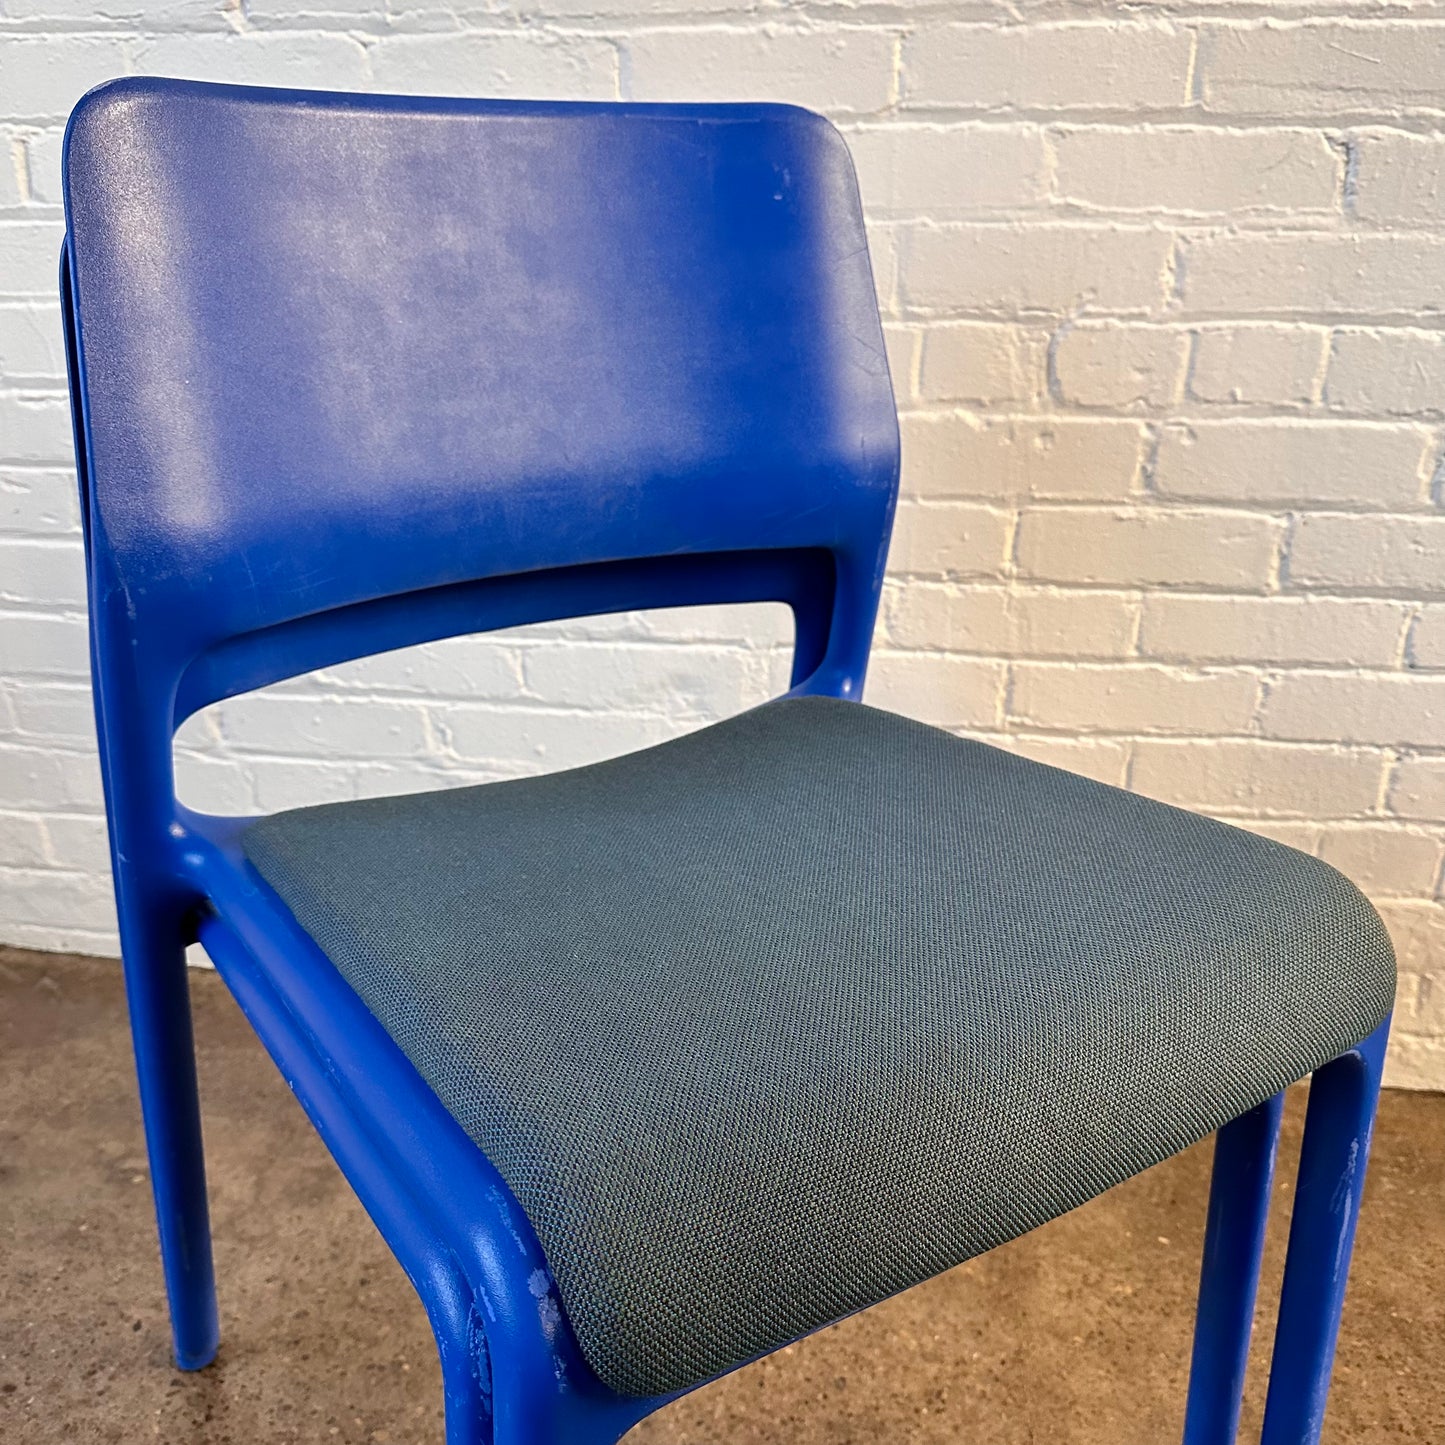 BLUE SPARK STACKING CHAIRS BY DON CHADWICK FOR KNOLL, PAIR